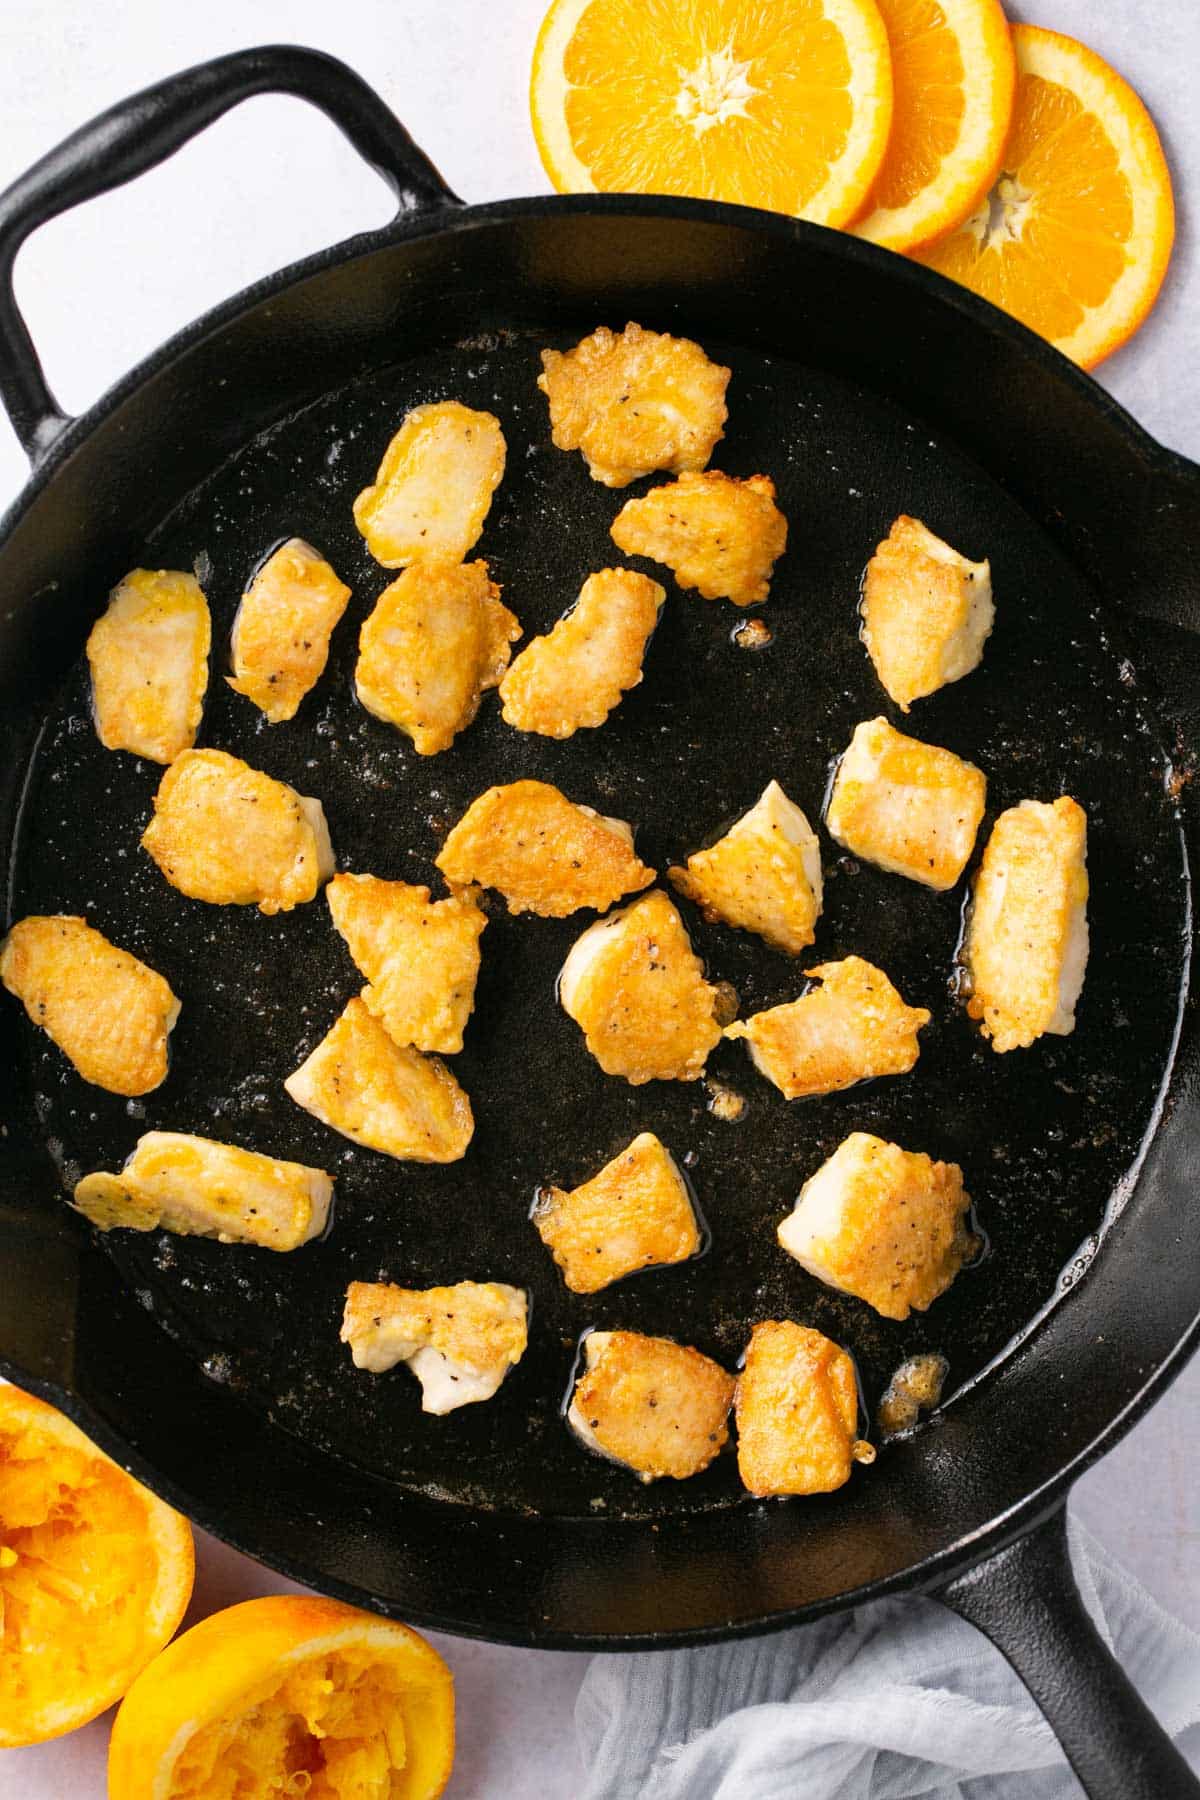 Cooking small pieces of chicken in a skillet.